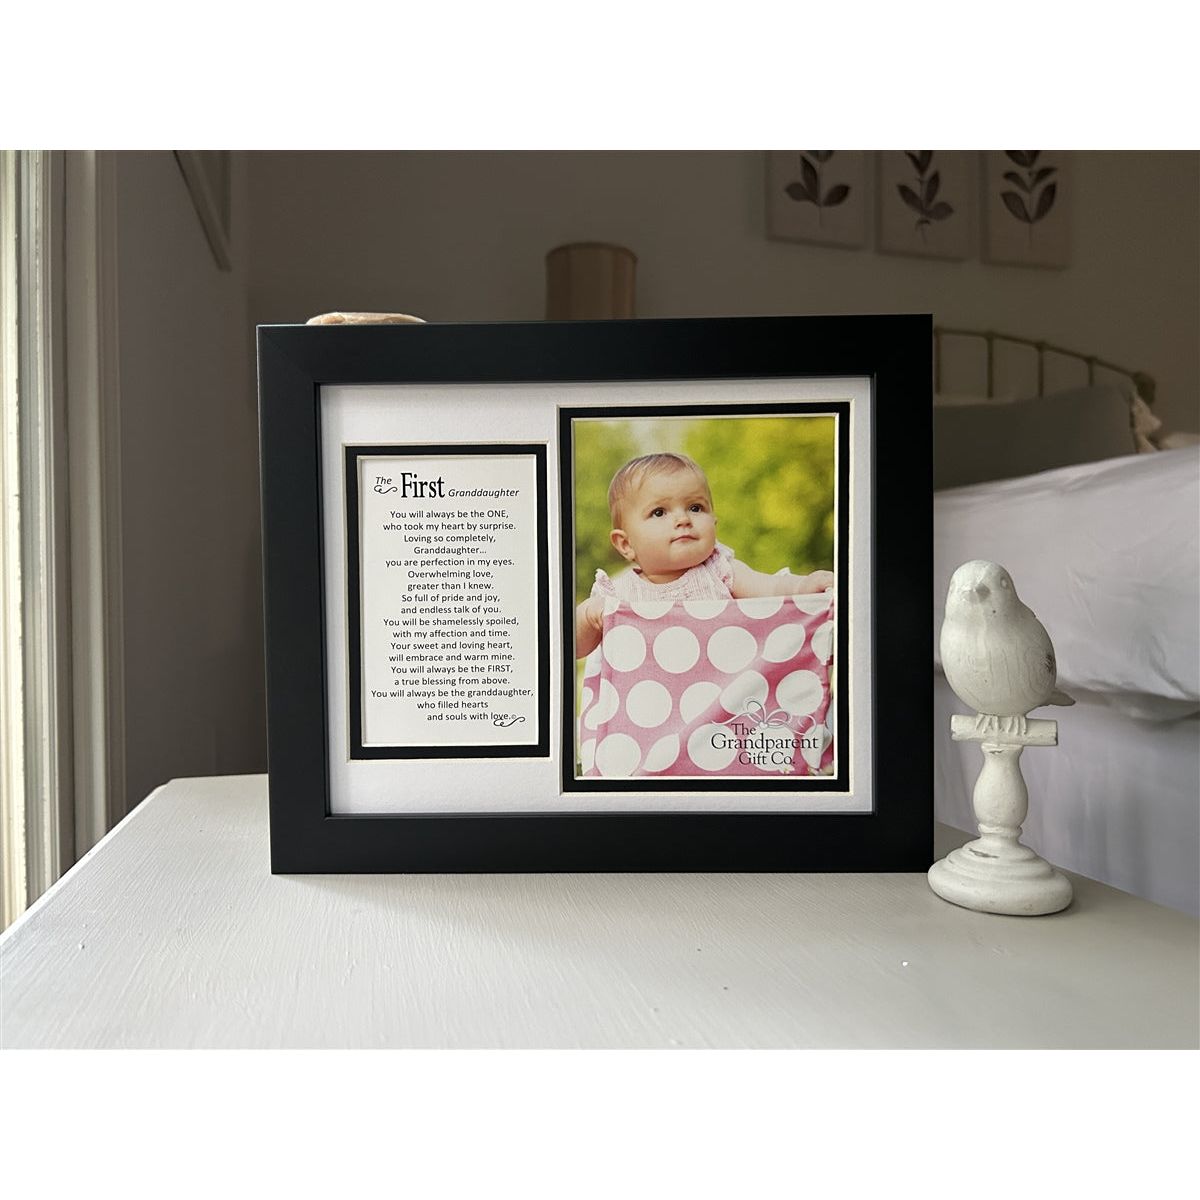 First Granddaughter frame and poem featuring a baby photo.